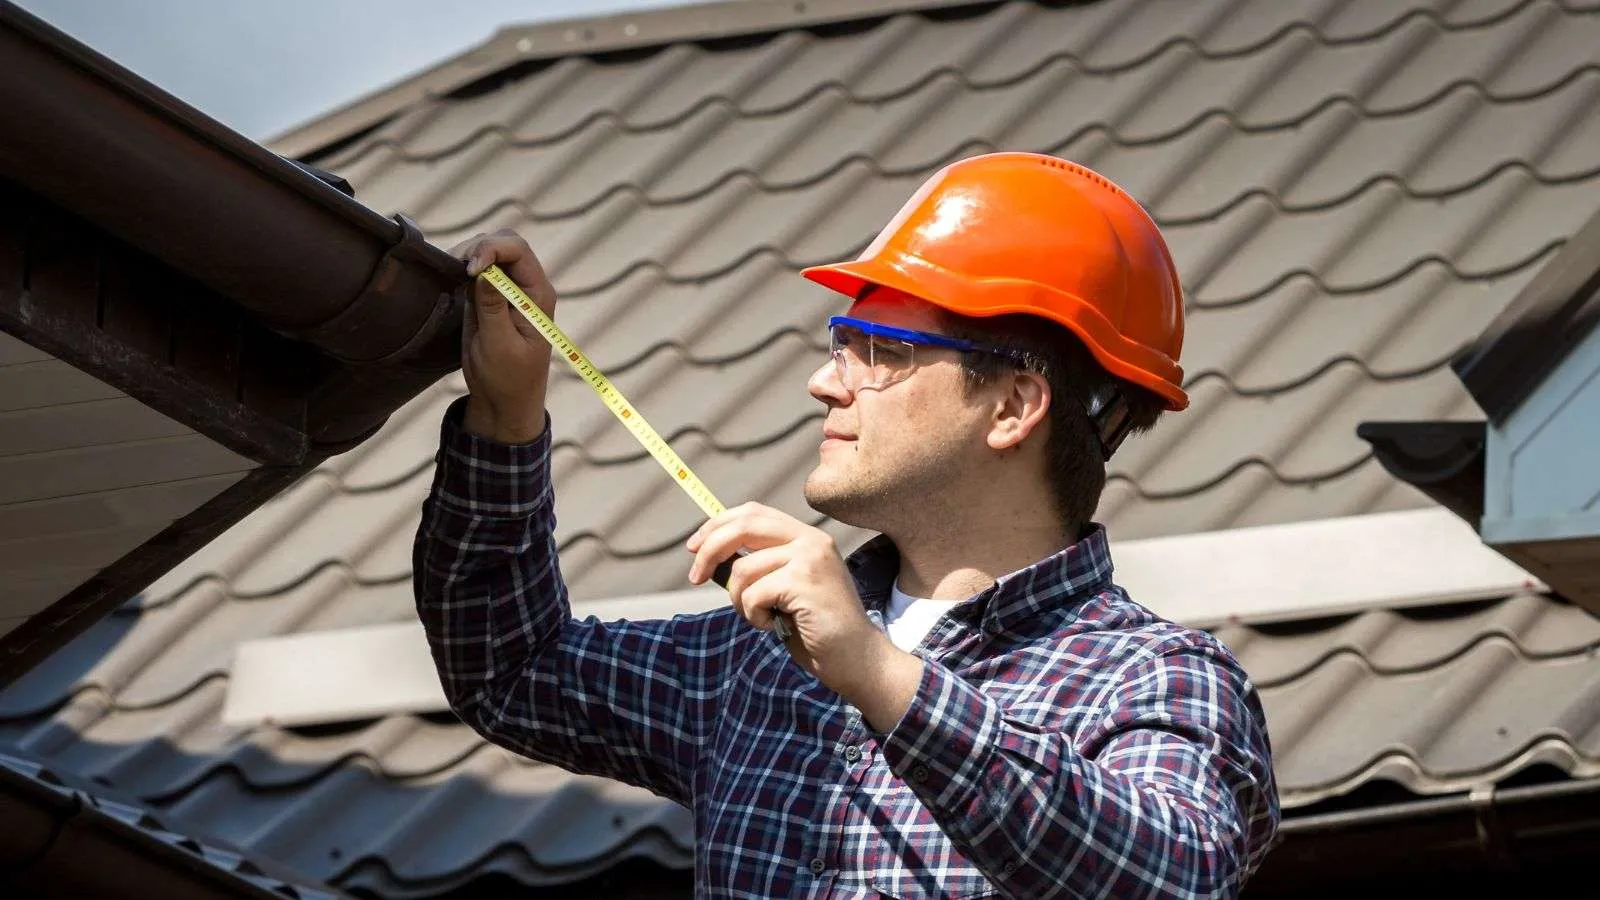 Roof maintenance to slow down depreciation - bighomeprojects.com